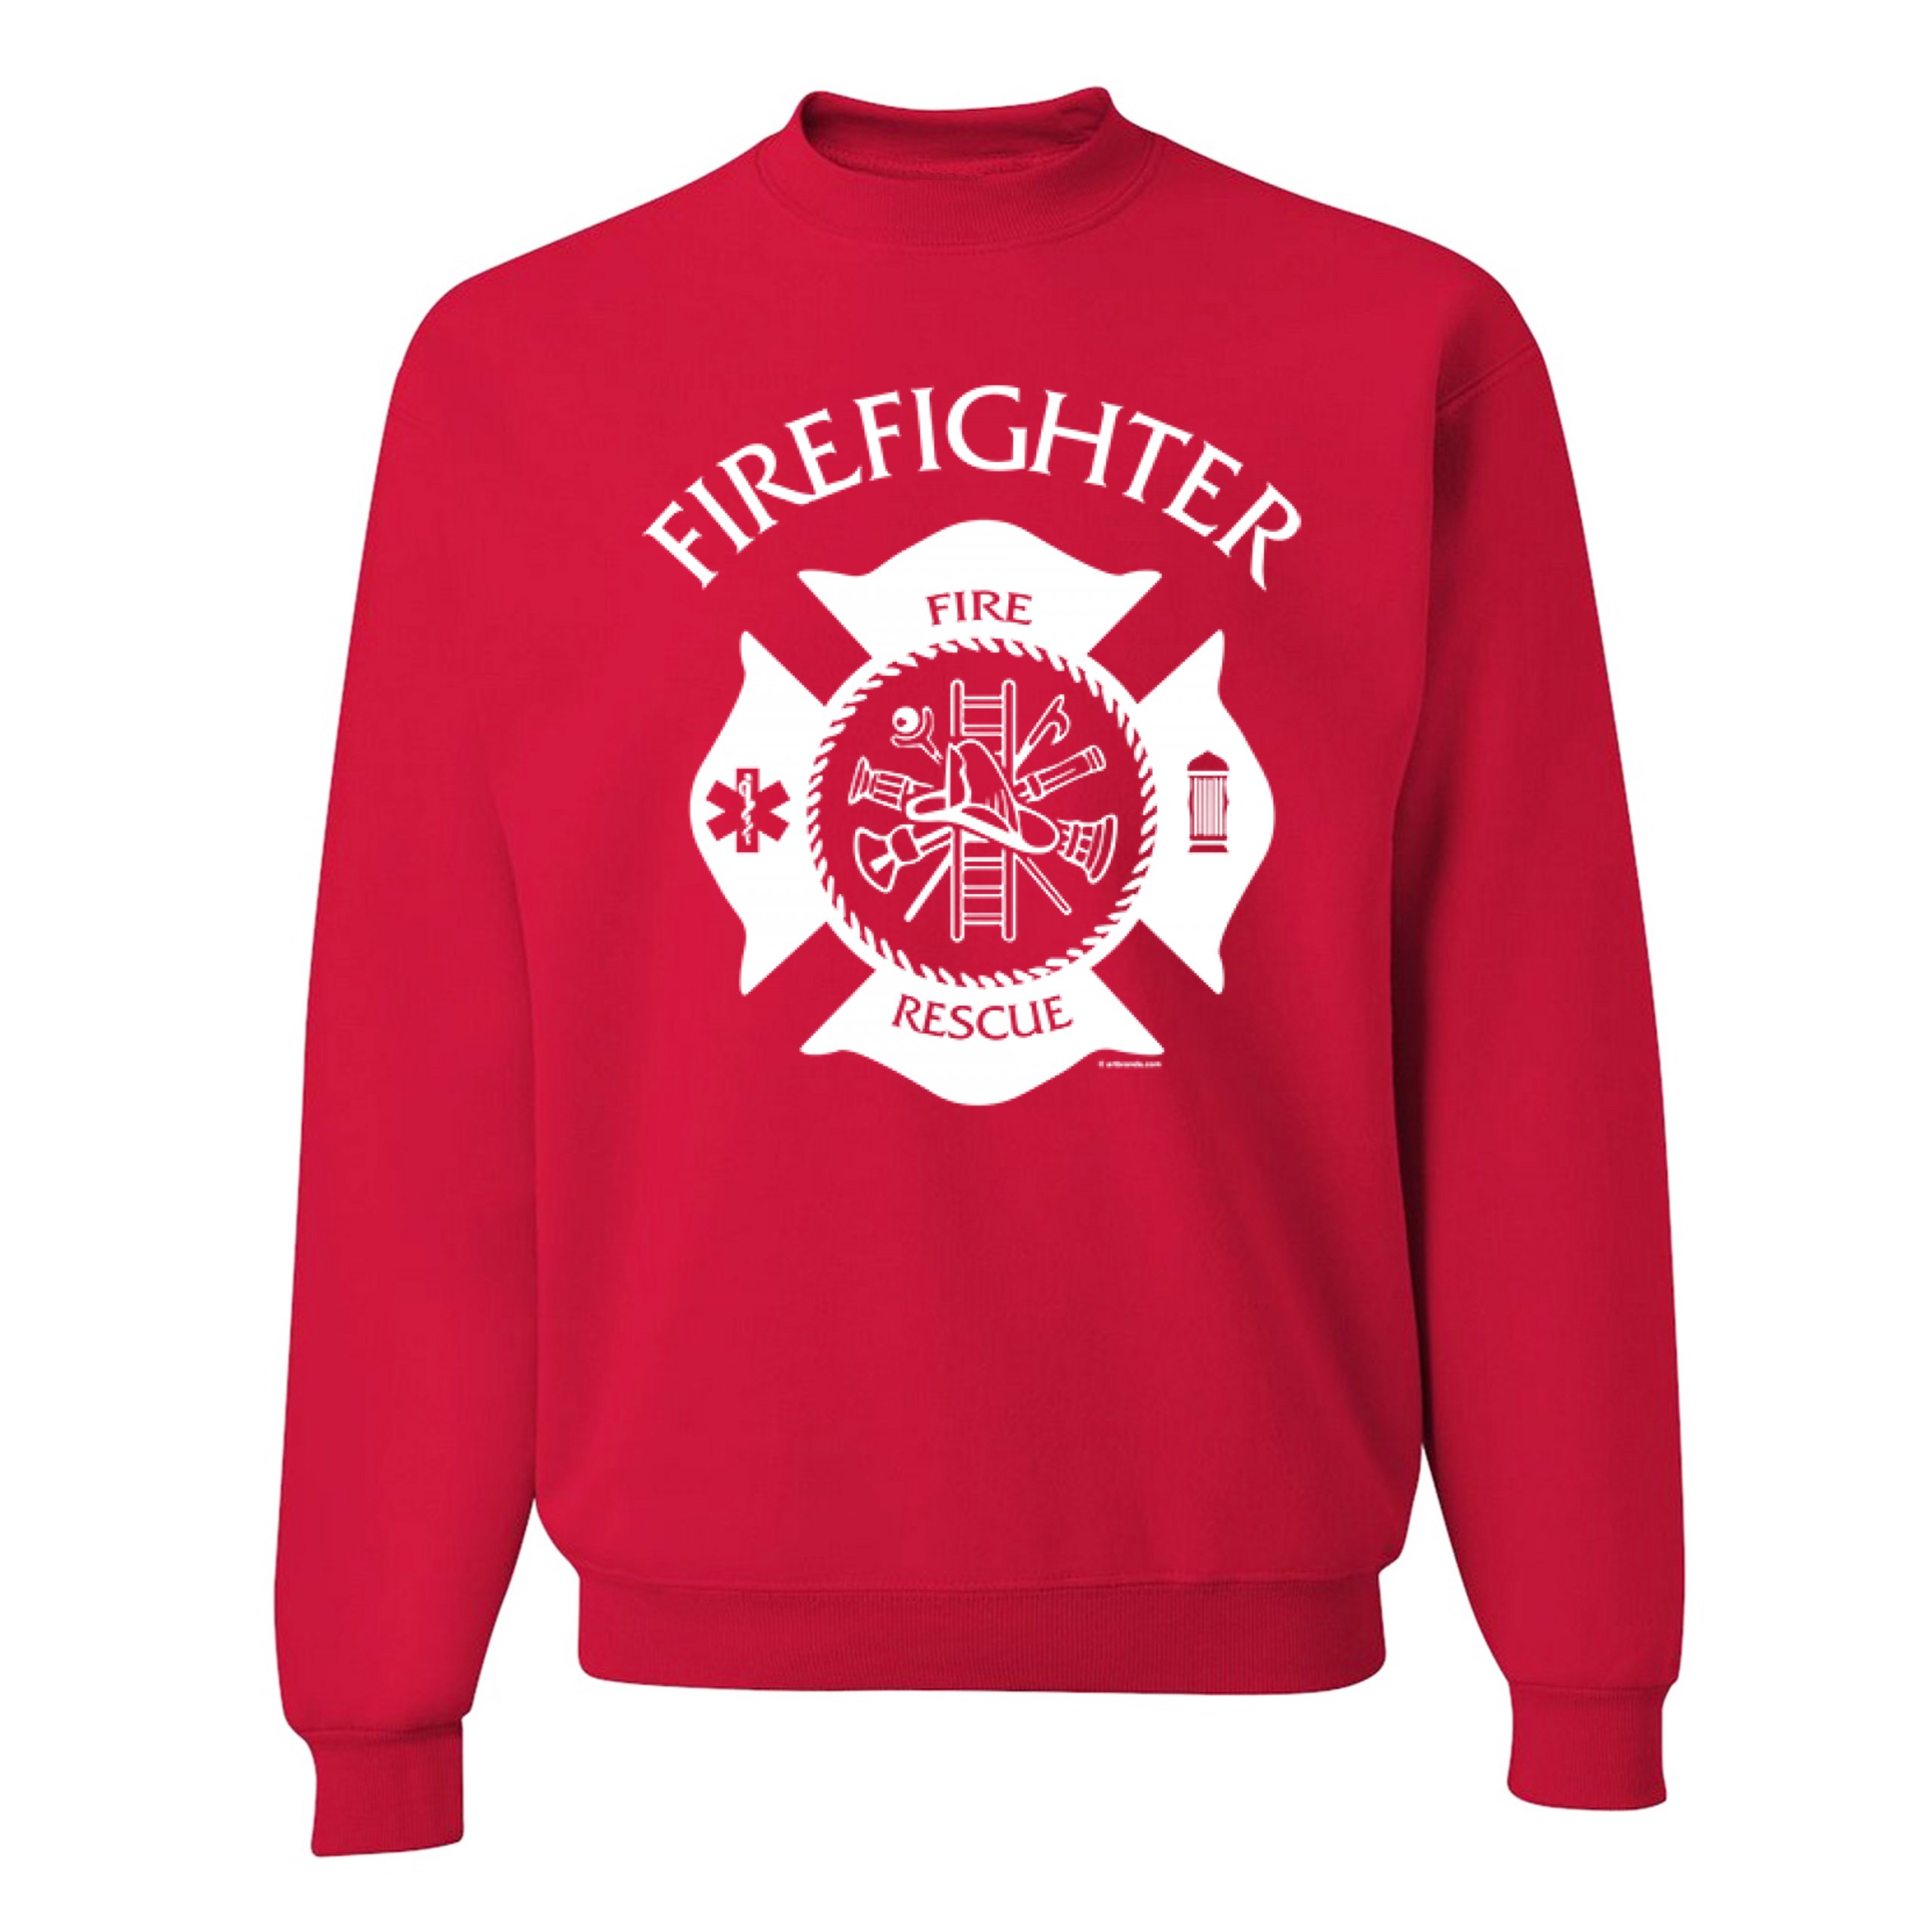 Firefighter Emblem Sweatshirt Fire and Rescue First Responders Crewneck 